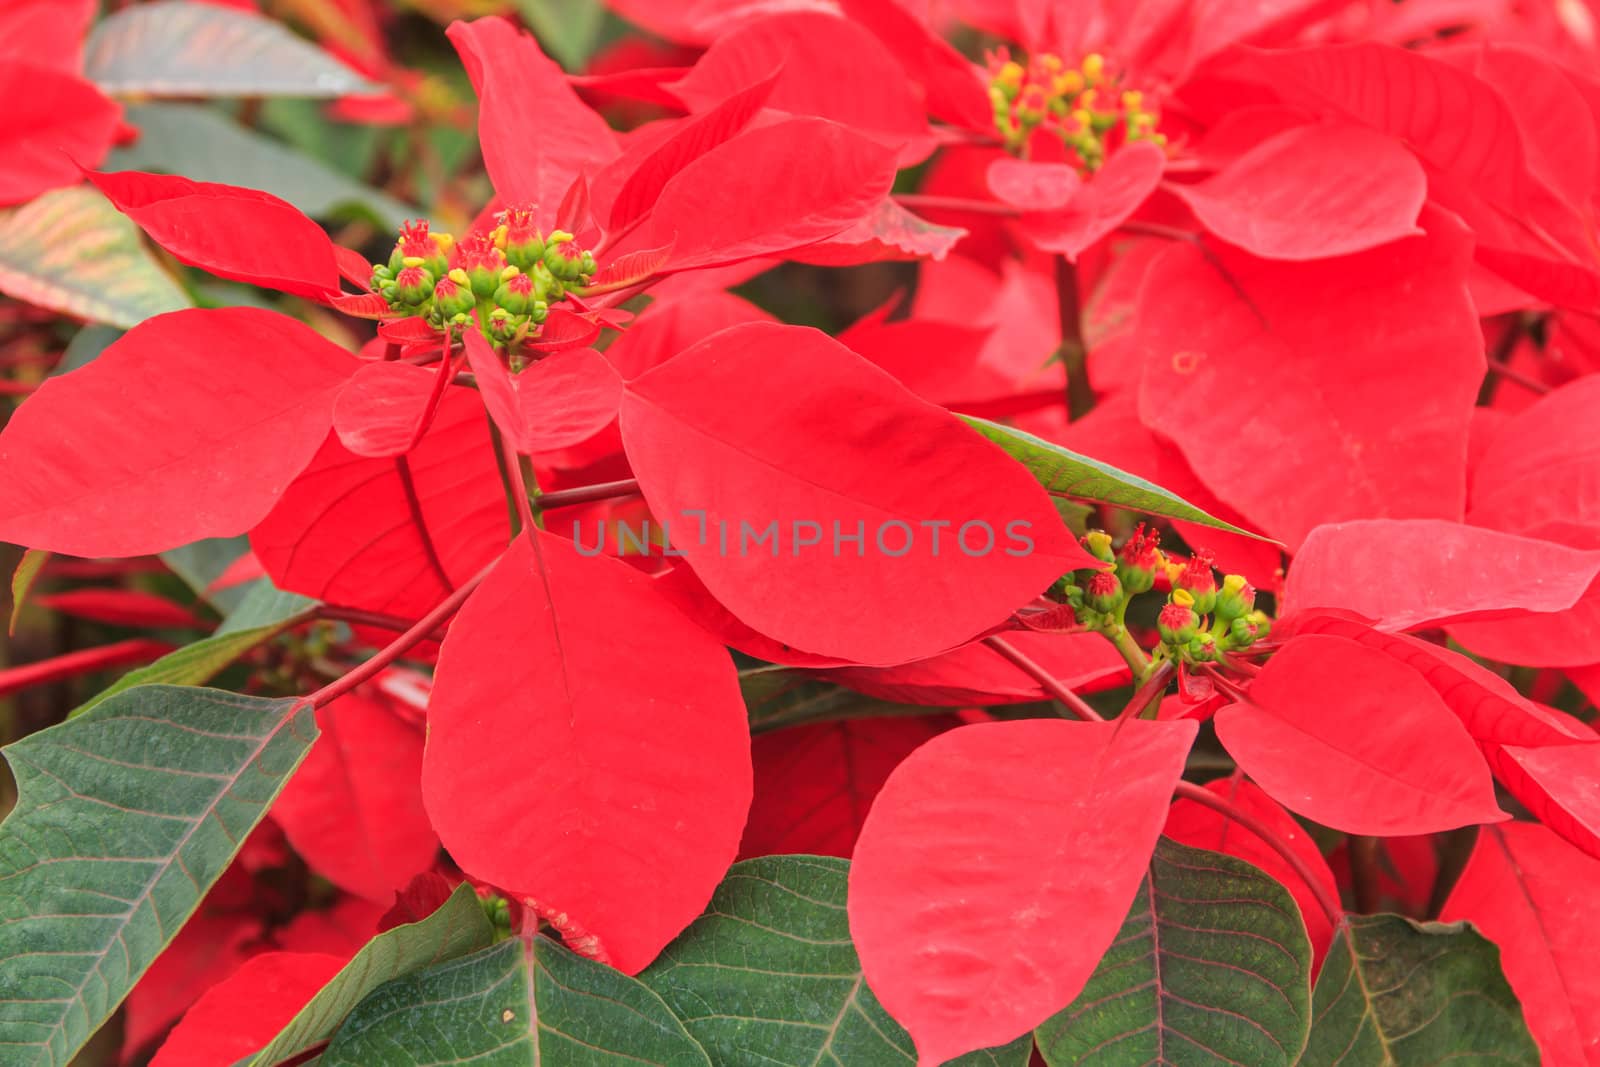 red poinsettia garden with green leaves - christmas flower